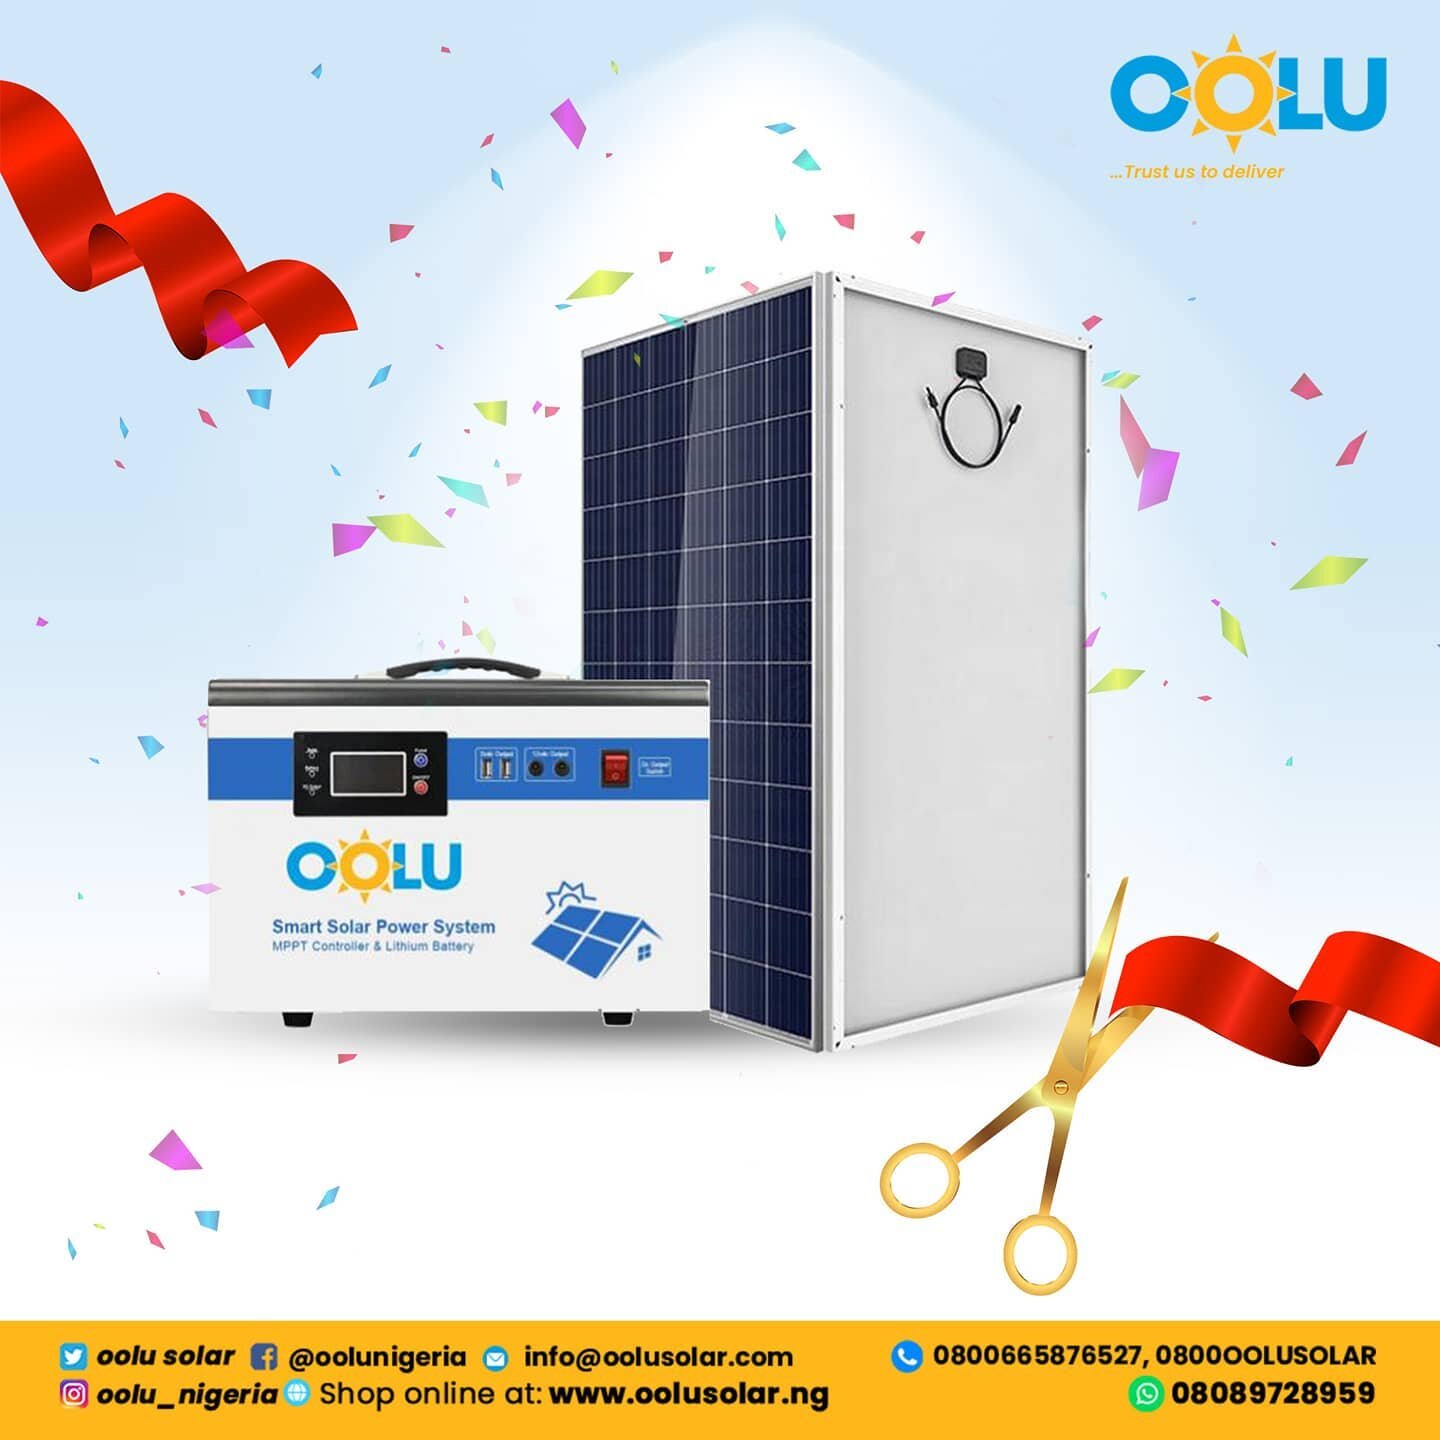 🌞🌞🌞hooray!!!🌞🌞🌞

We have launched a new product in Nigeria!

Oolu launches the POWERHUB Smart Solar Power System in Nigeria. This product is perfect for small and micro businesses or for when grid electricity is not stable. 

For more informati